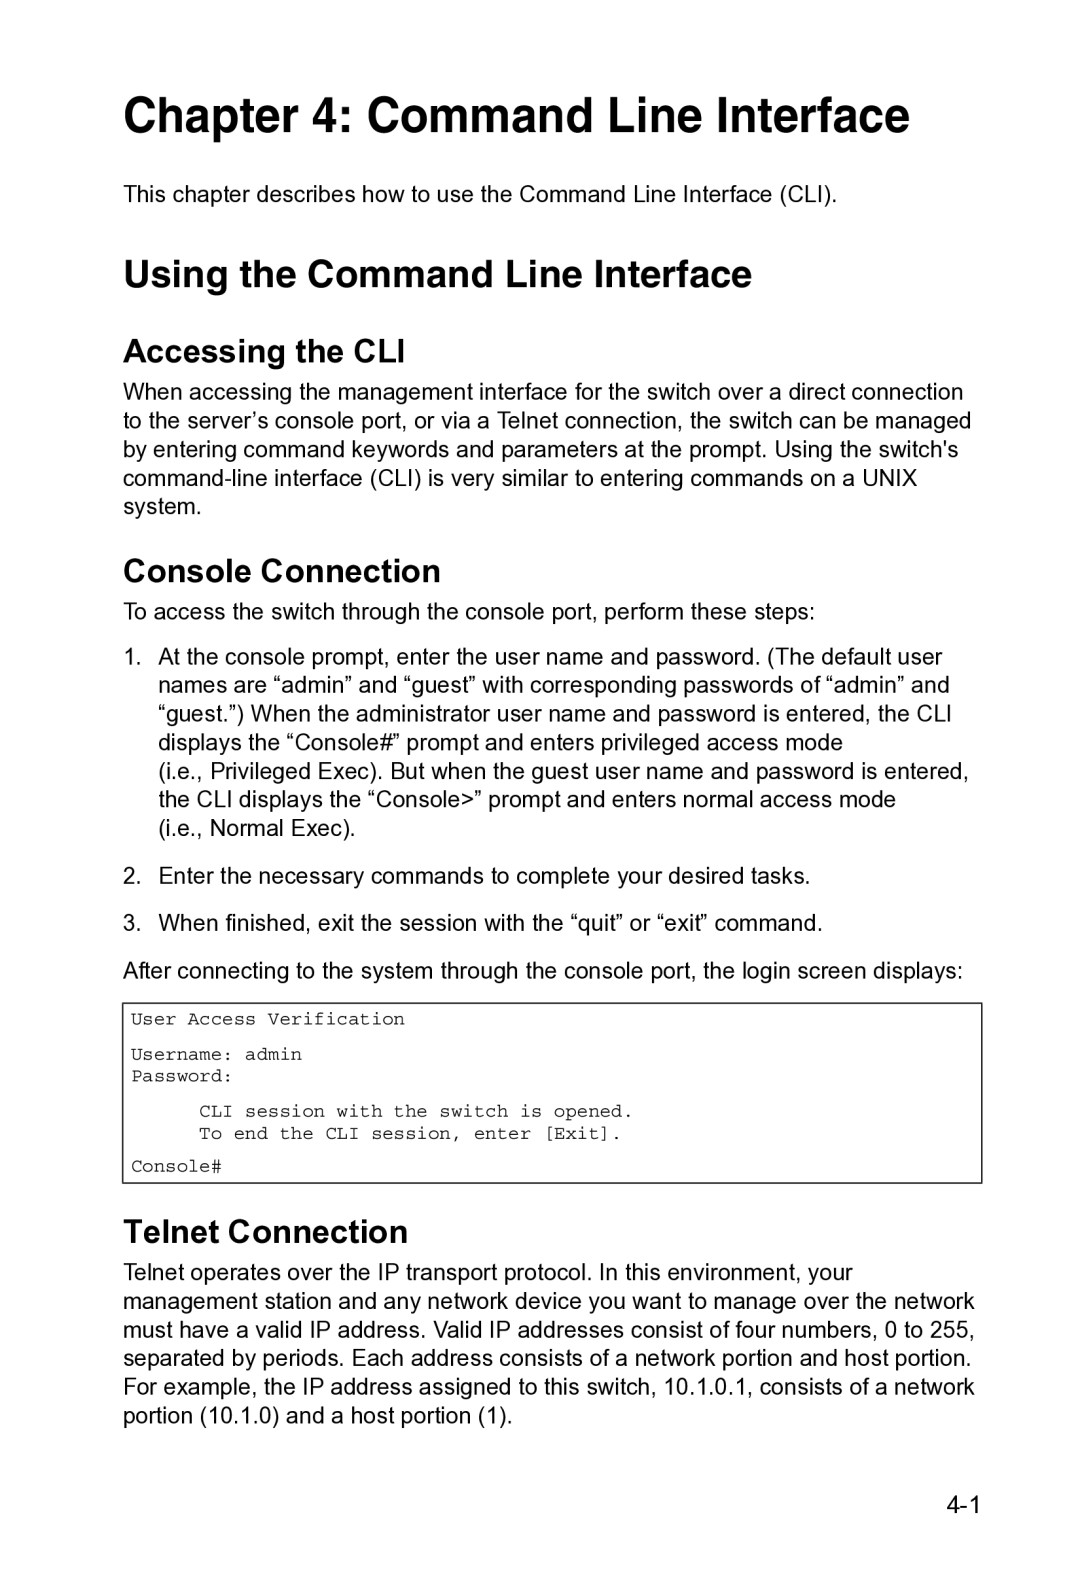 Accton Technology VS4512DC manual Using the Command Line Interface, Accessing the CLI, Telnet Connection 